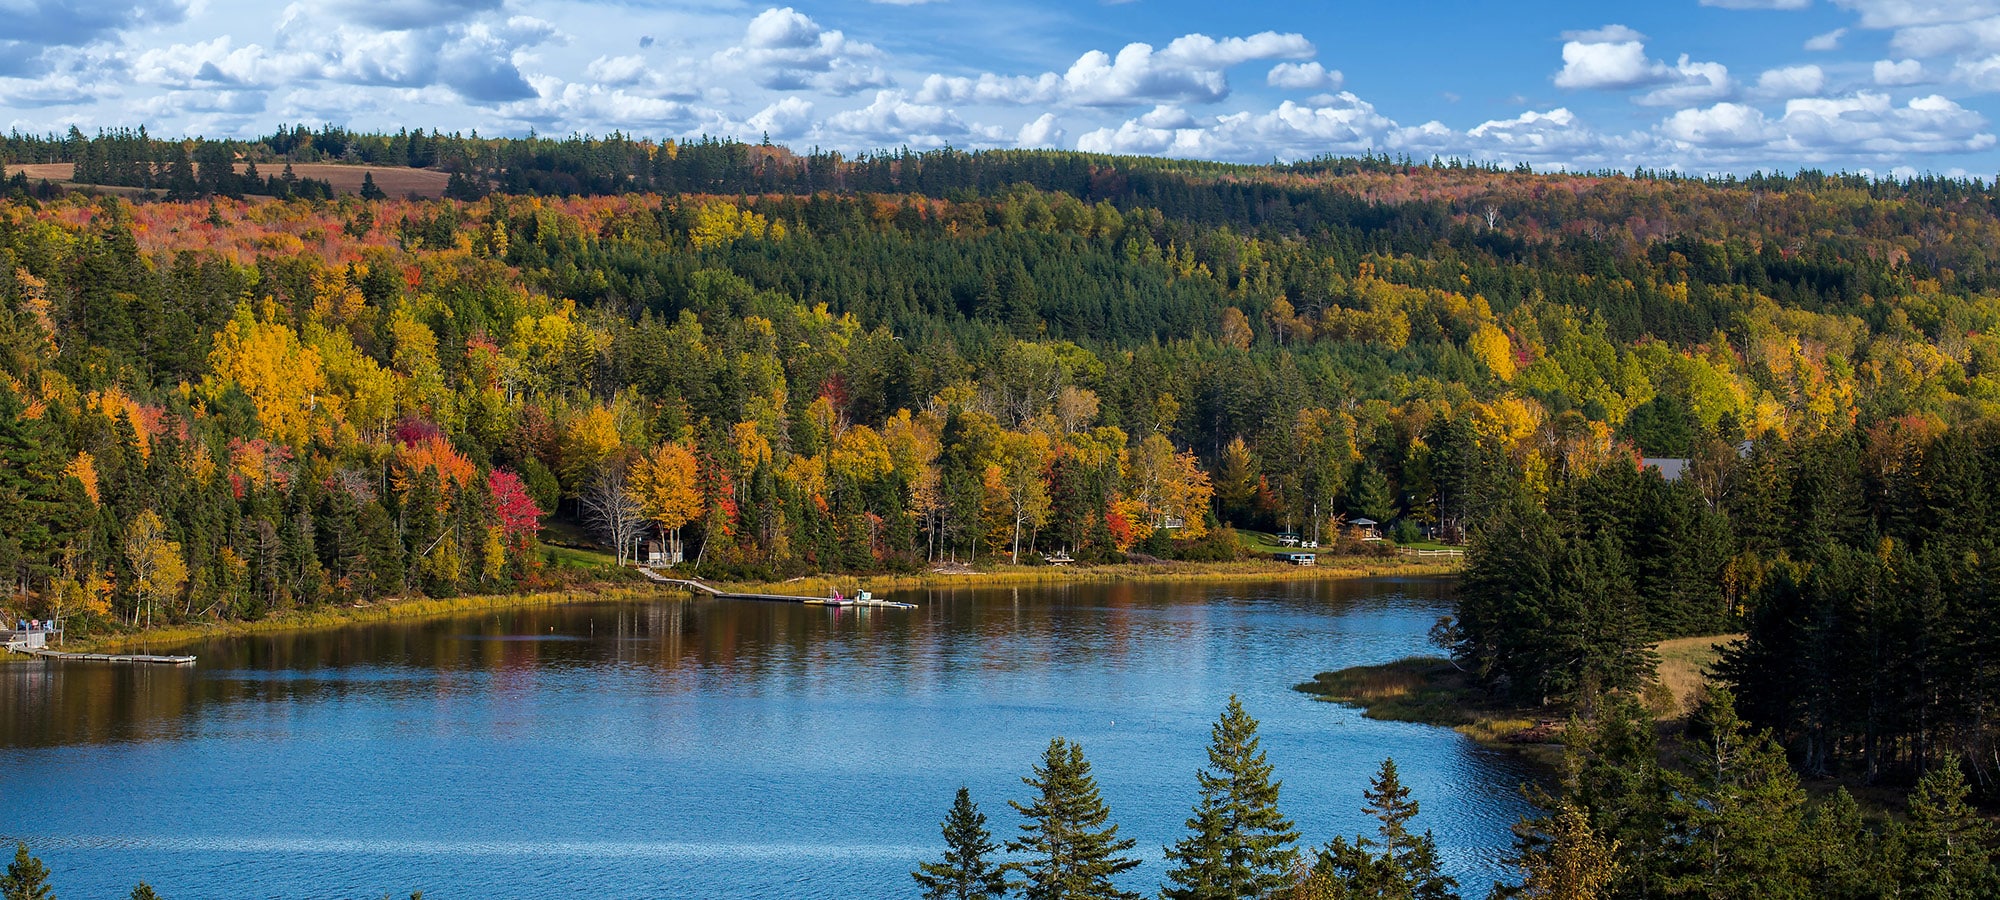 When it’s time to trade drinking rum punch under a palm tree for sipping warm cider under a golden maple, these are the islands that boast the best fall foliage.